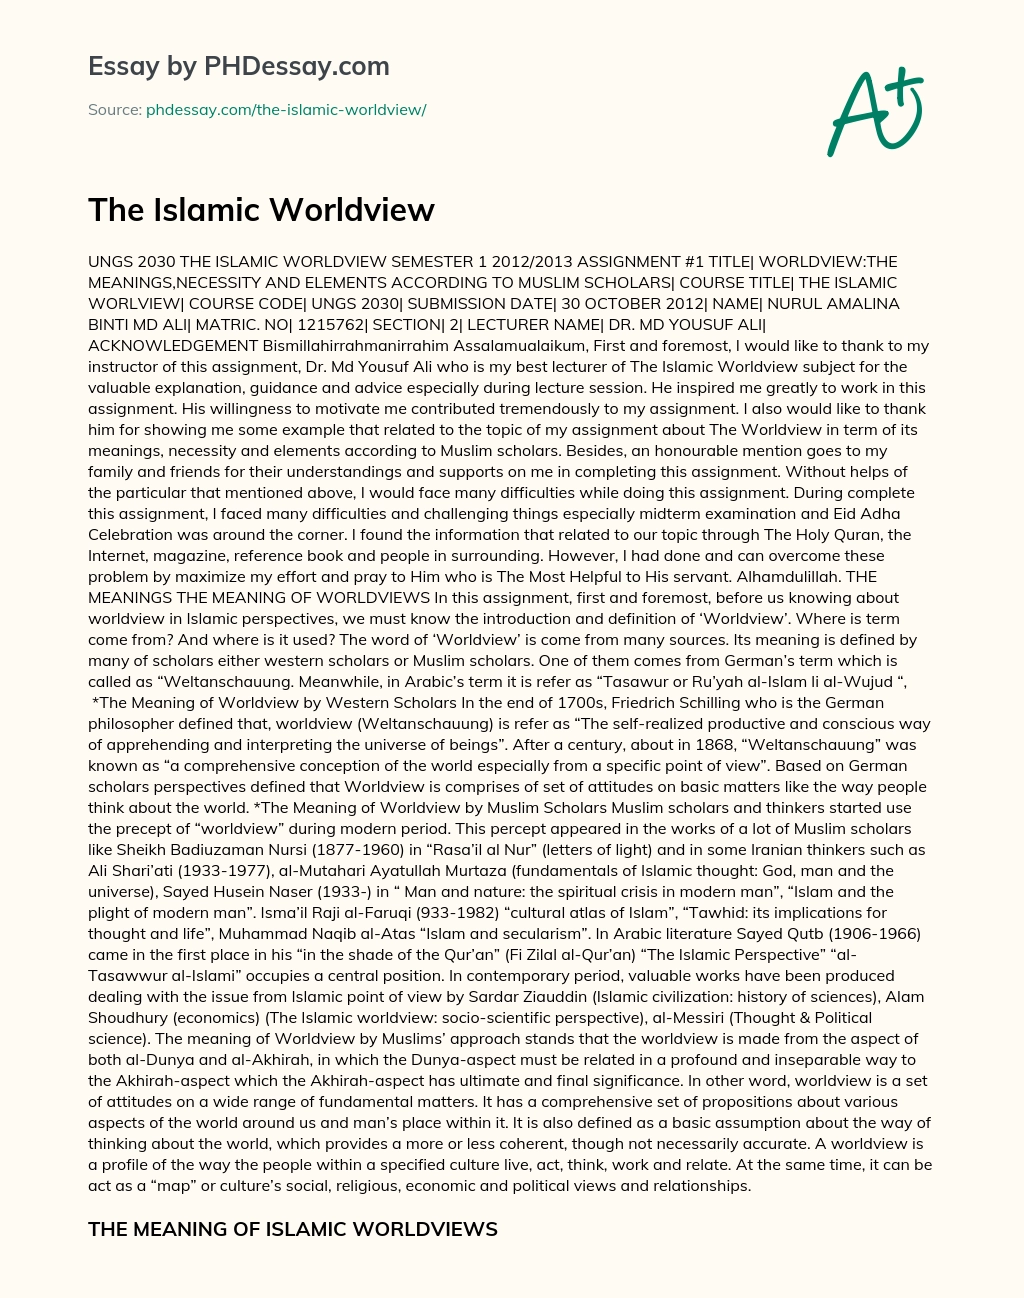 The Islamic Worldview essay